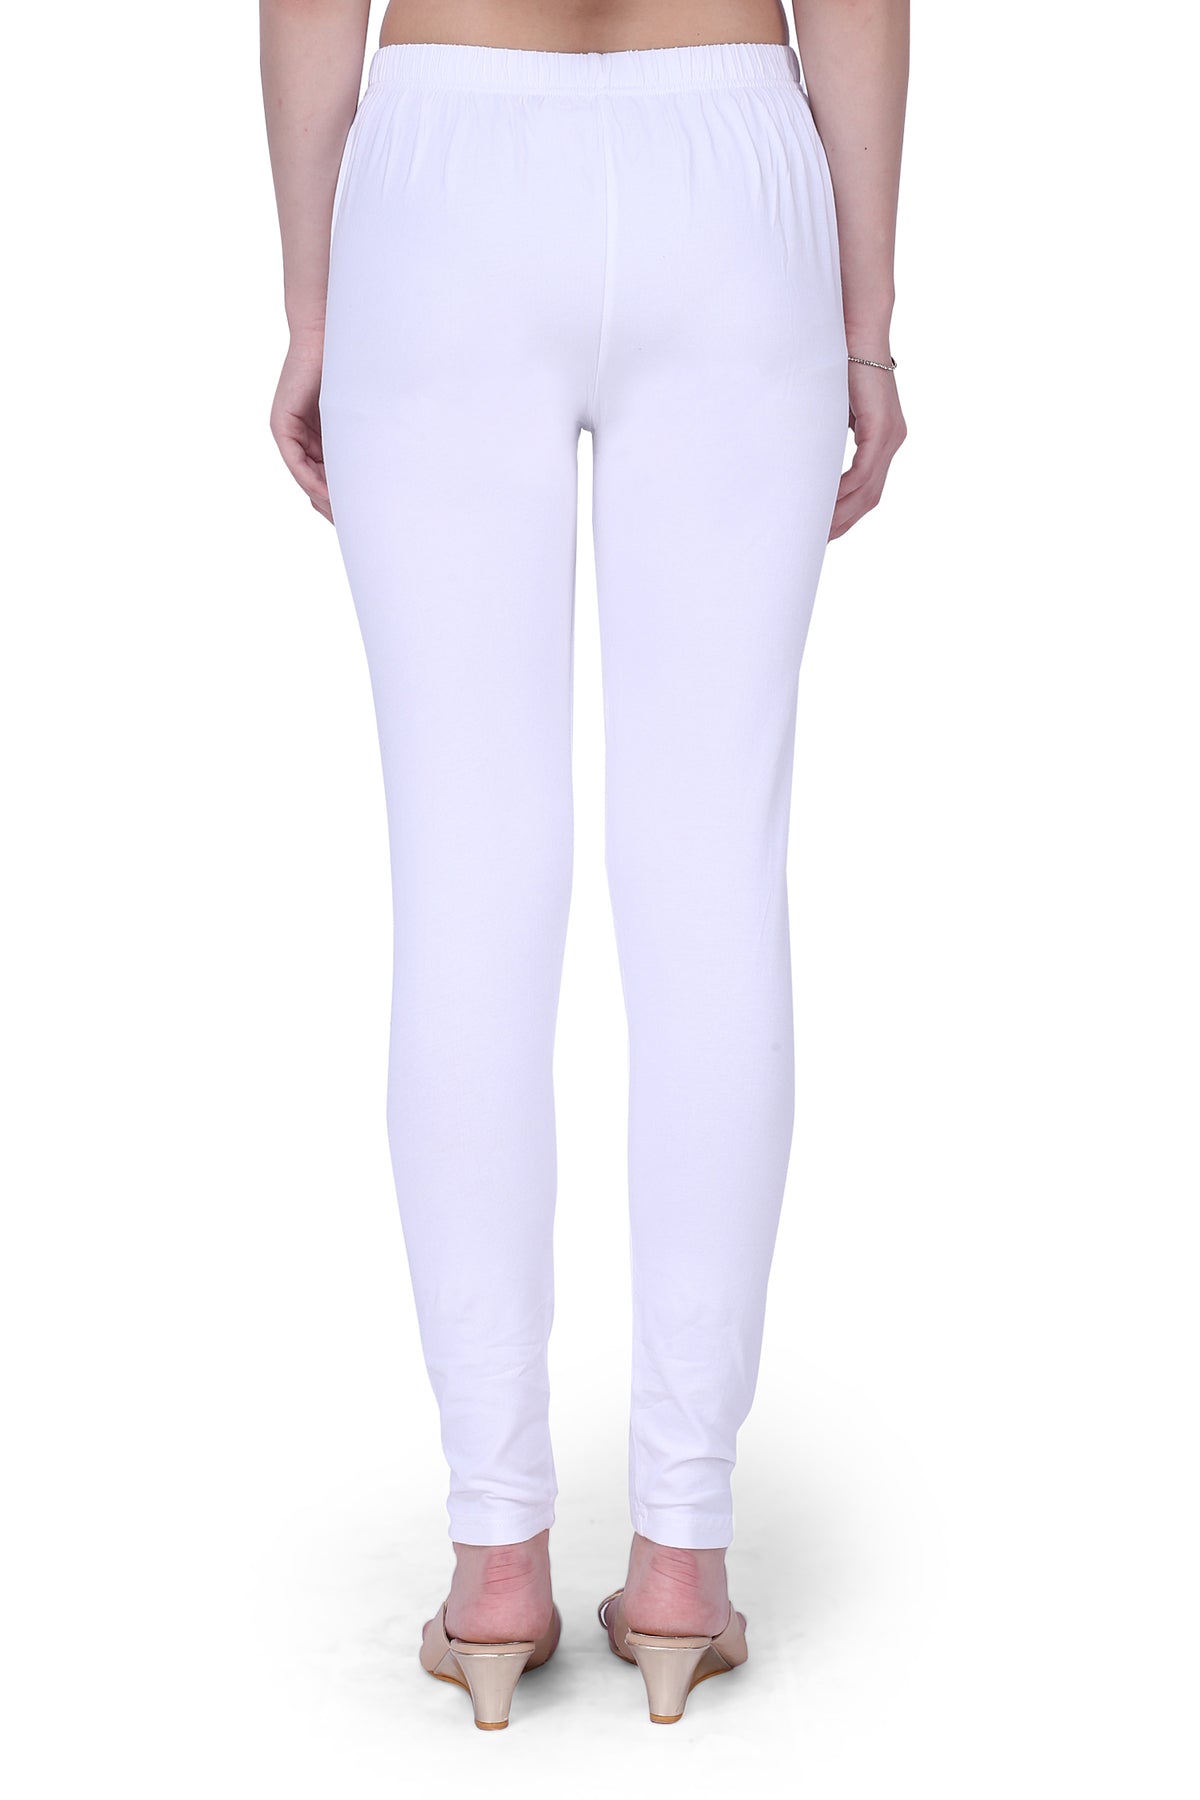 Buy online Solid White Viscose Knit Loose Leggings from Churidars